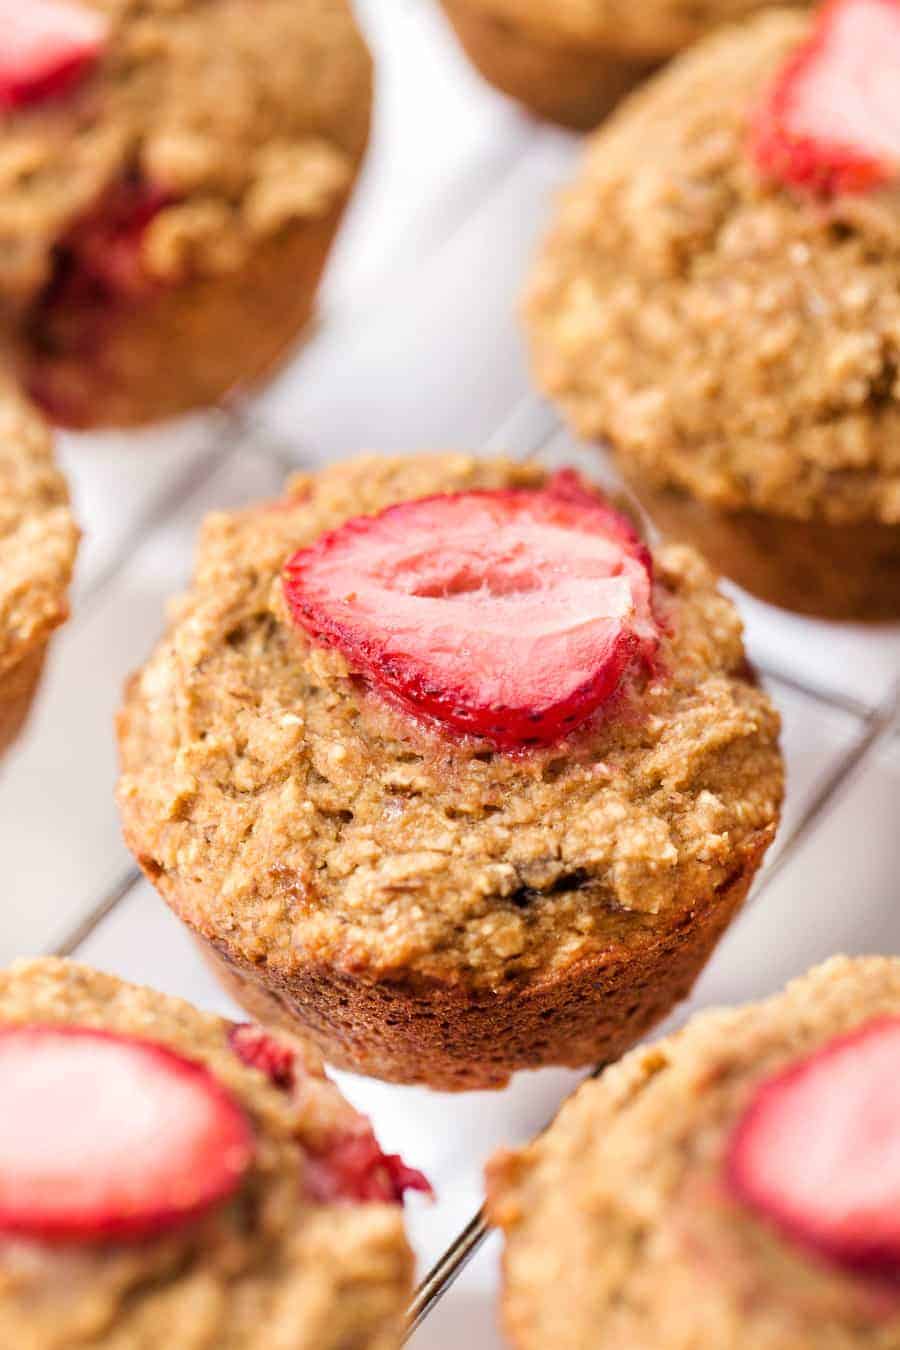 Healthy Banana Oatmeal Muffins with Strawberry on top